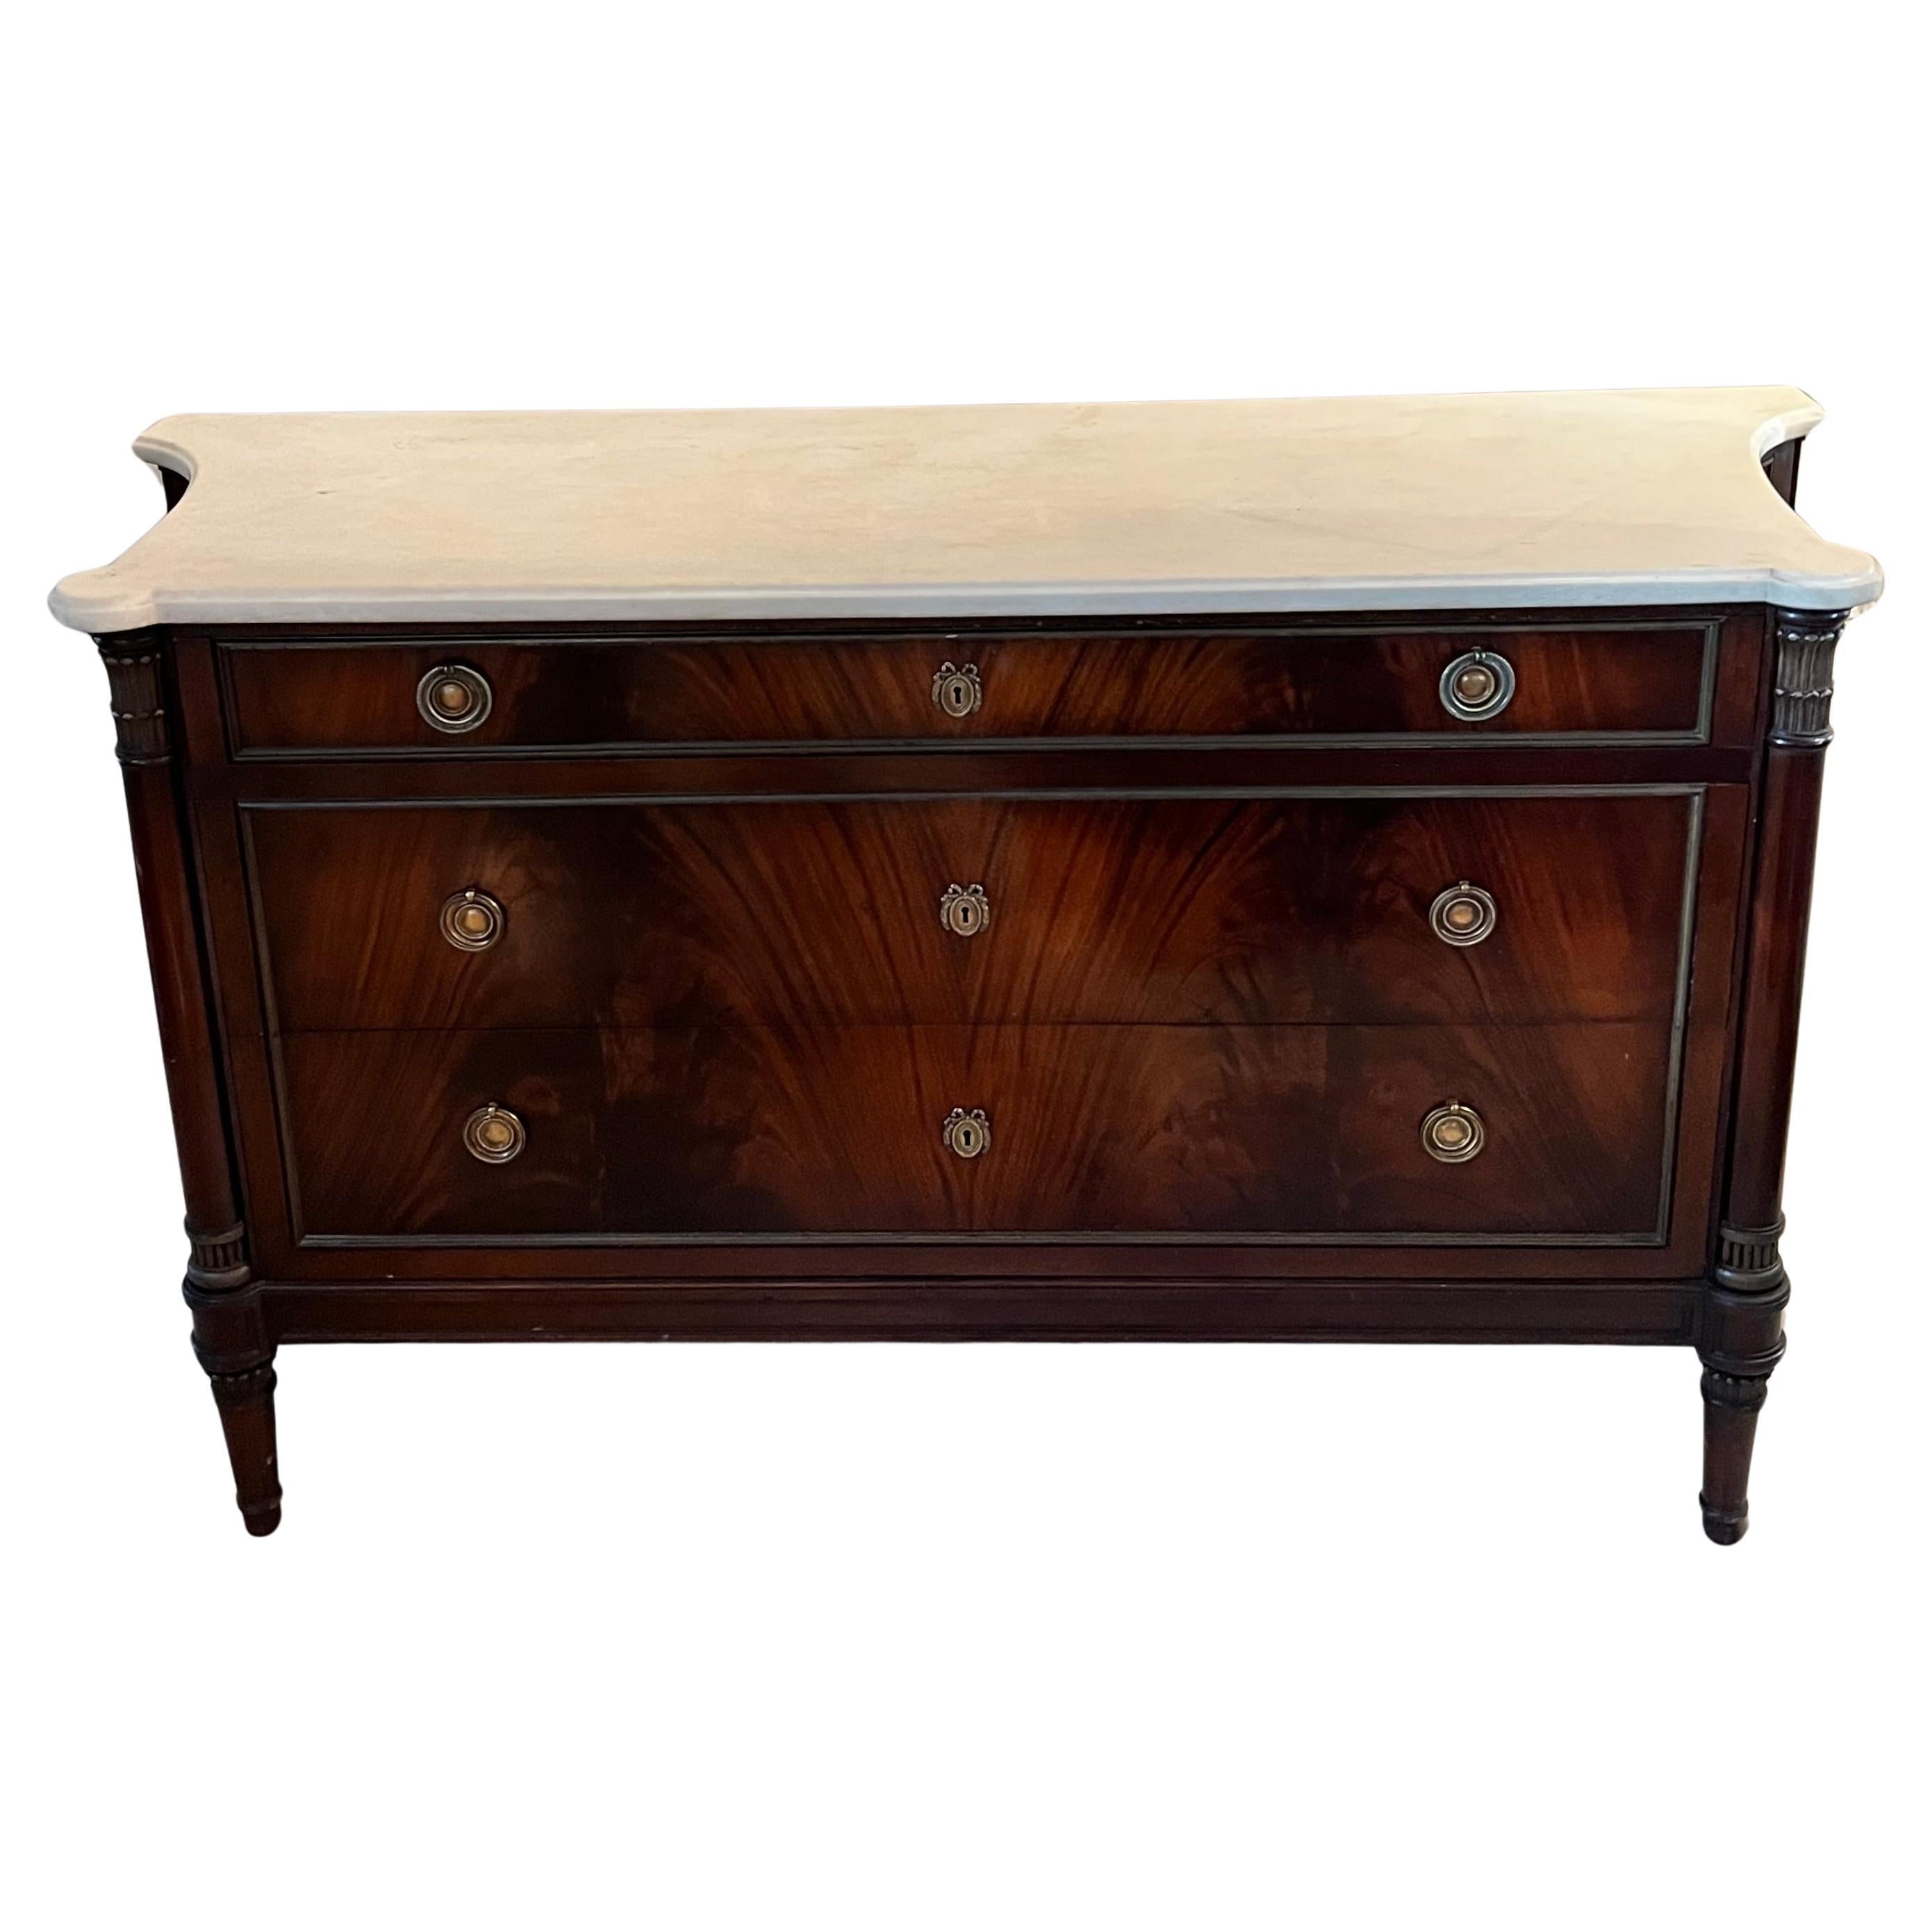 A Stunning Early 20th Century French Louis XVI Commode or Chest of drawers.  The wood is a gorgeous Mahogany with a statuary marble top.  The three drawers are deep and roomy.  The top drawer has many divisions and a place for small contents, and